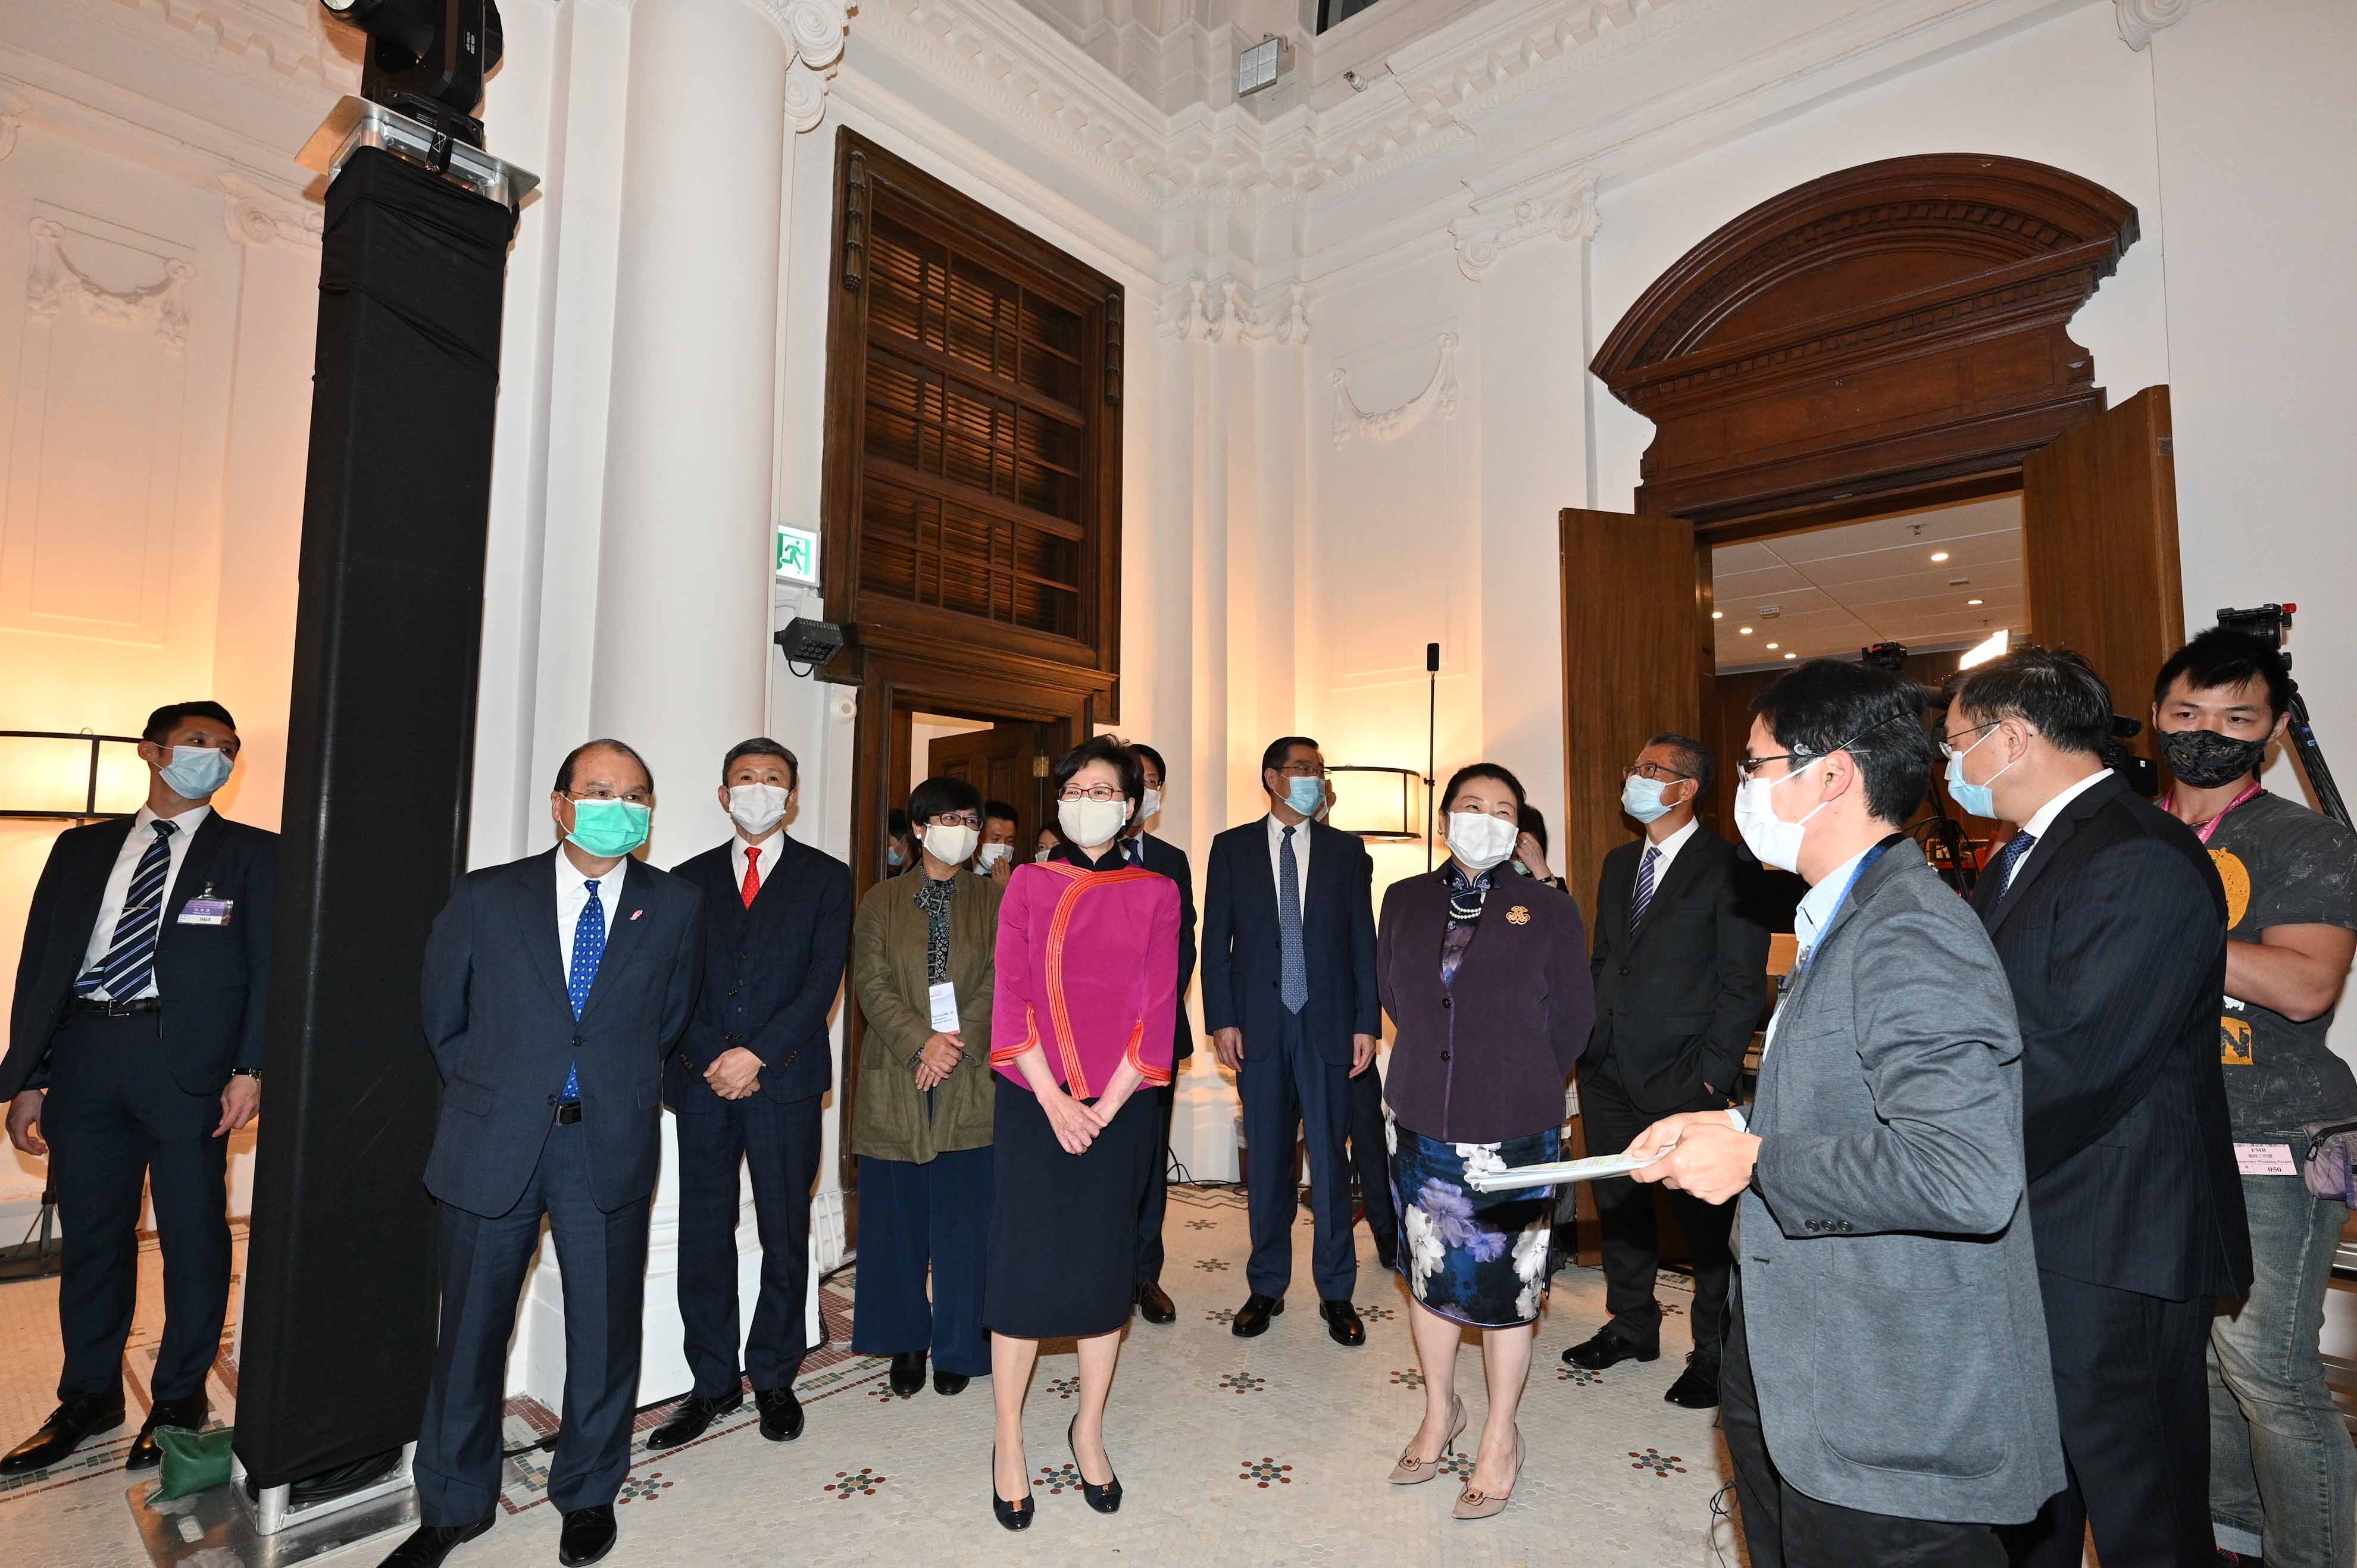 The opening of the Hong Kong Legal Week 2020 was held today (November 2) at the former French Mission Building. Today also marked the opening of the Hong Kong Legal Hub and the official launch of the 'Vision 2030 for Rule of Law'. Photo shows the Chief Executive, Mrs Carrie Lam; the Chief Secretary for Administration, Mr Matthew Cheung Kin-chung; the Financial Secretary, Mr Paul Chan; and the Secretary for Justice, Ms Teresa Cheng, SC, at the guided tour of the former French Mission Building, which is now a part of the Hong Kong Legal Hub.